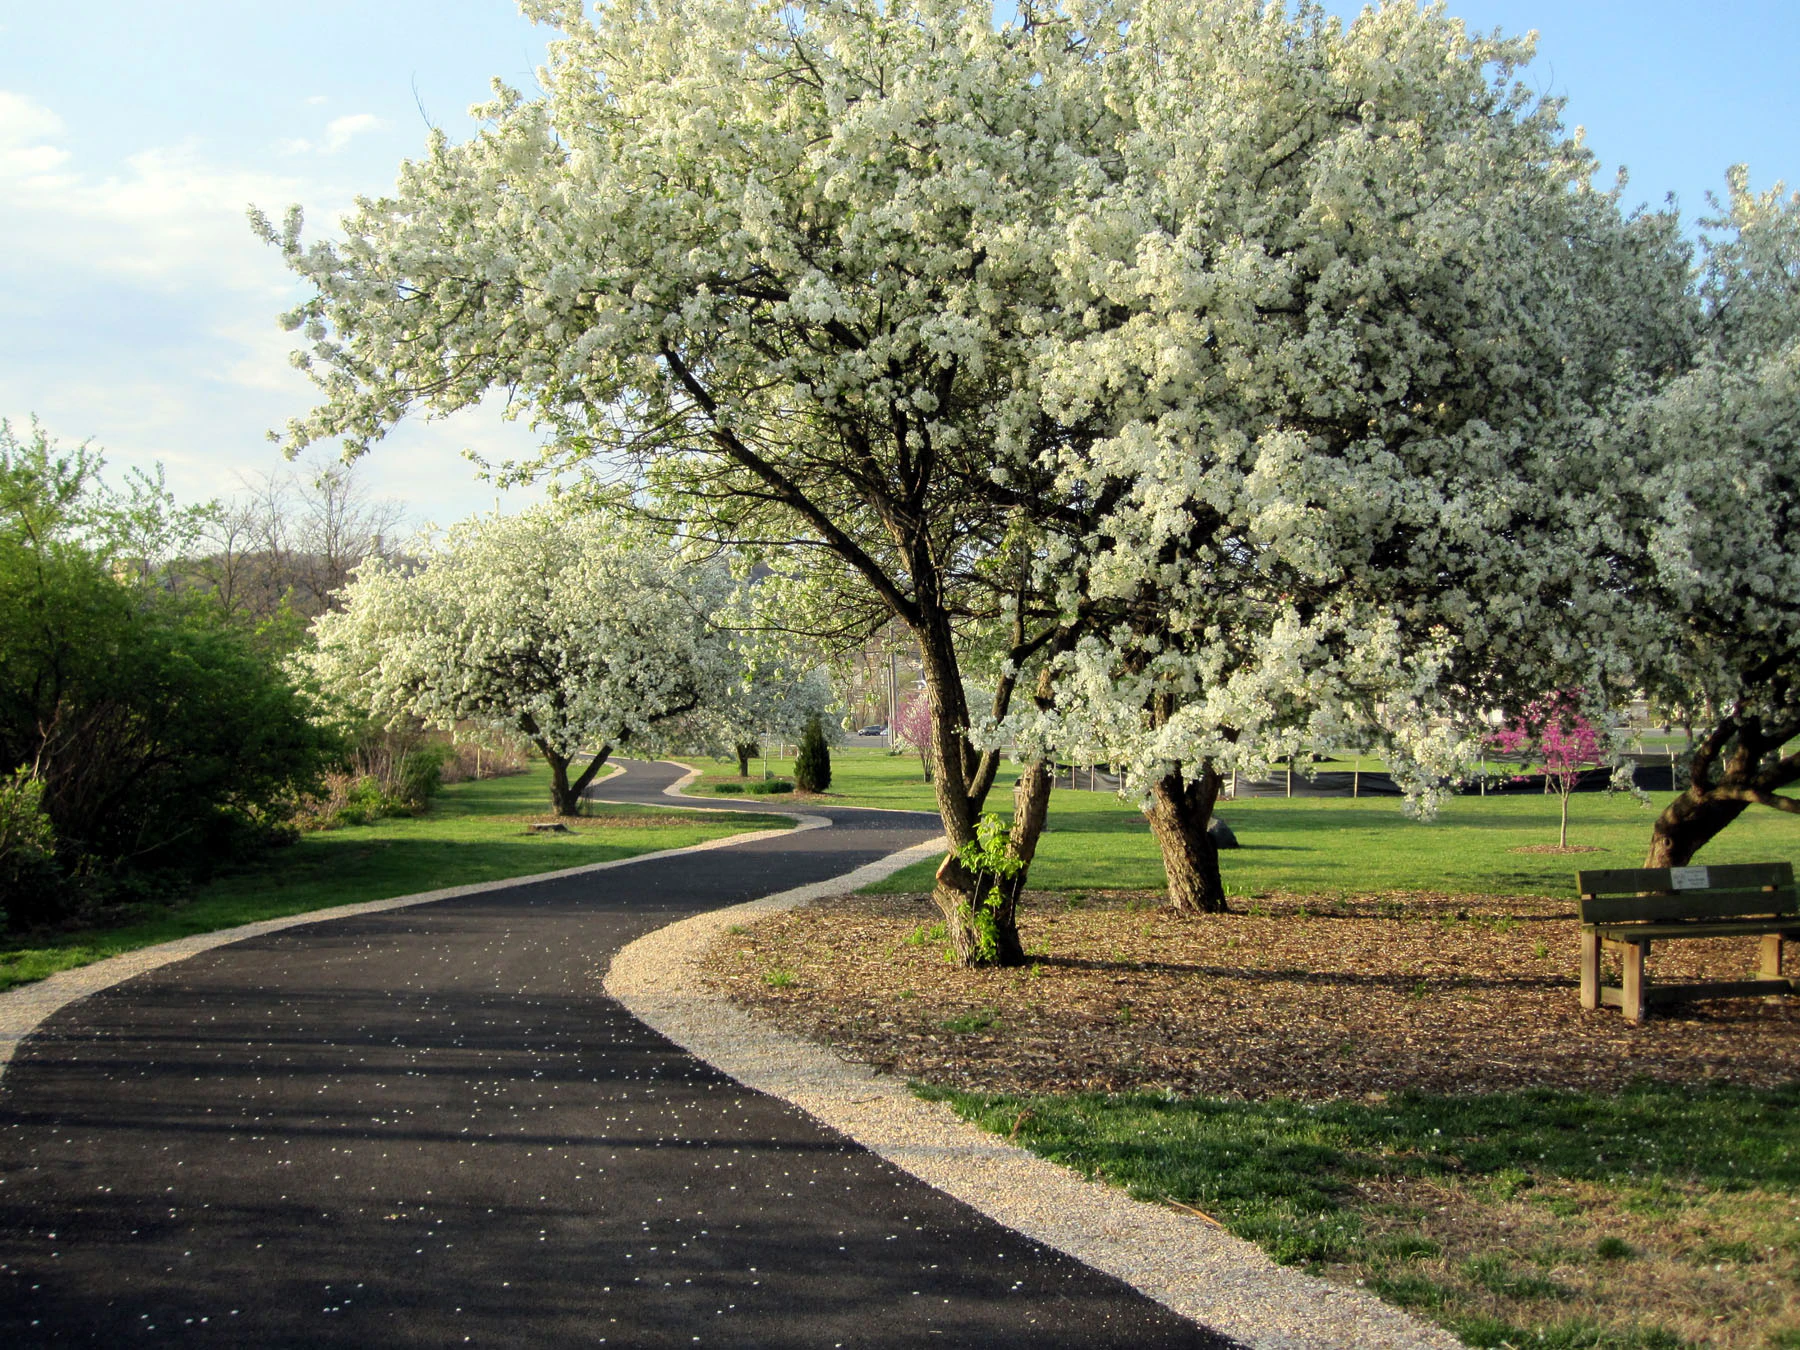 South River Greenway Trail - Get Outdoors - City Parks